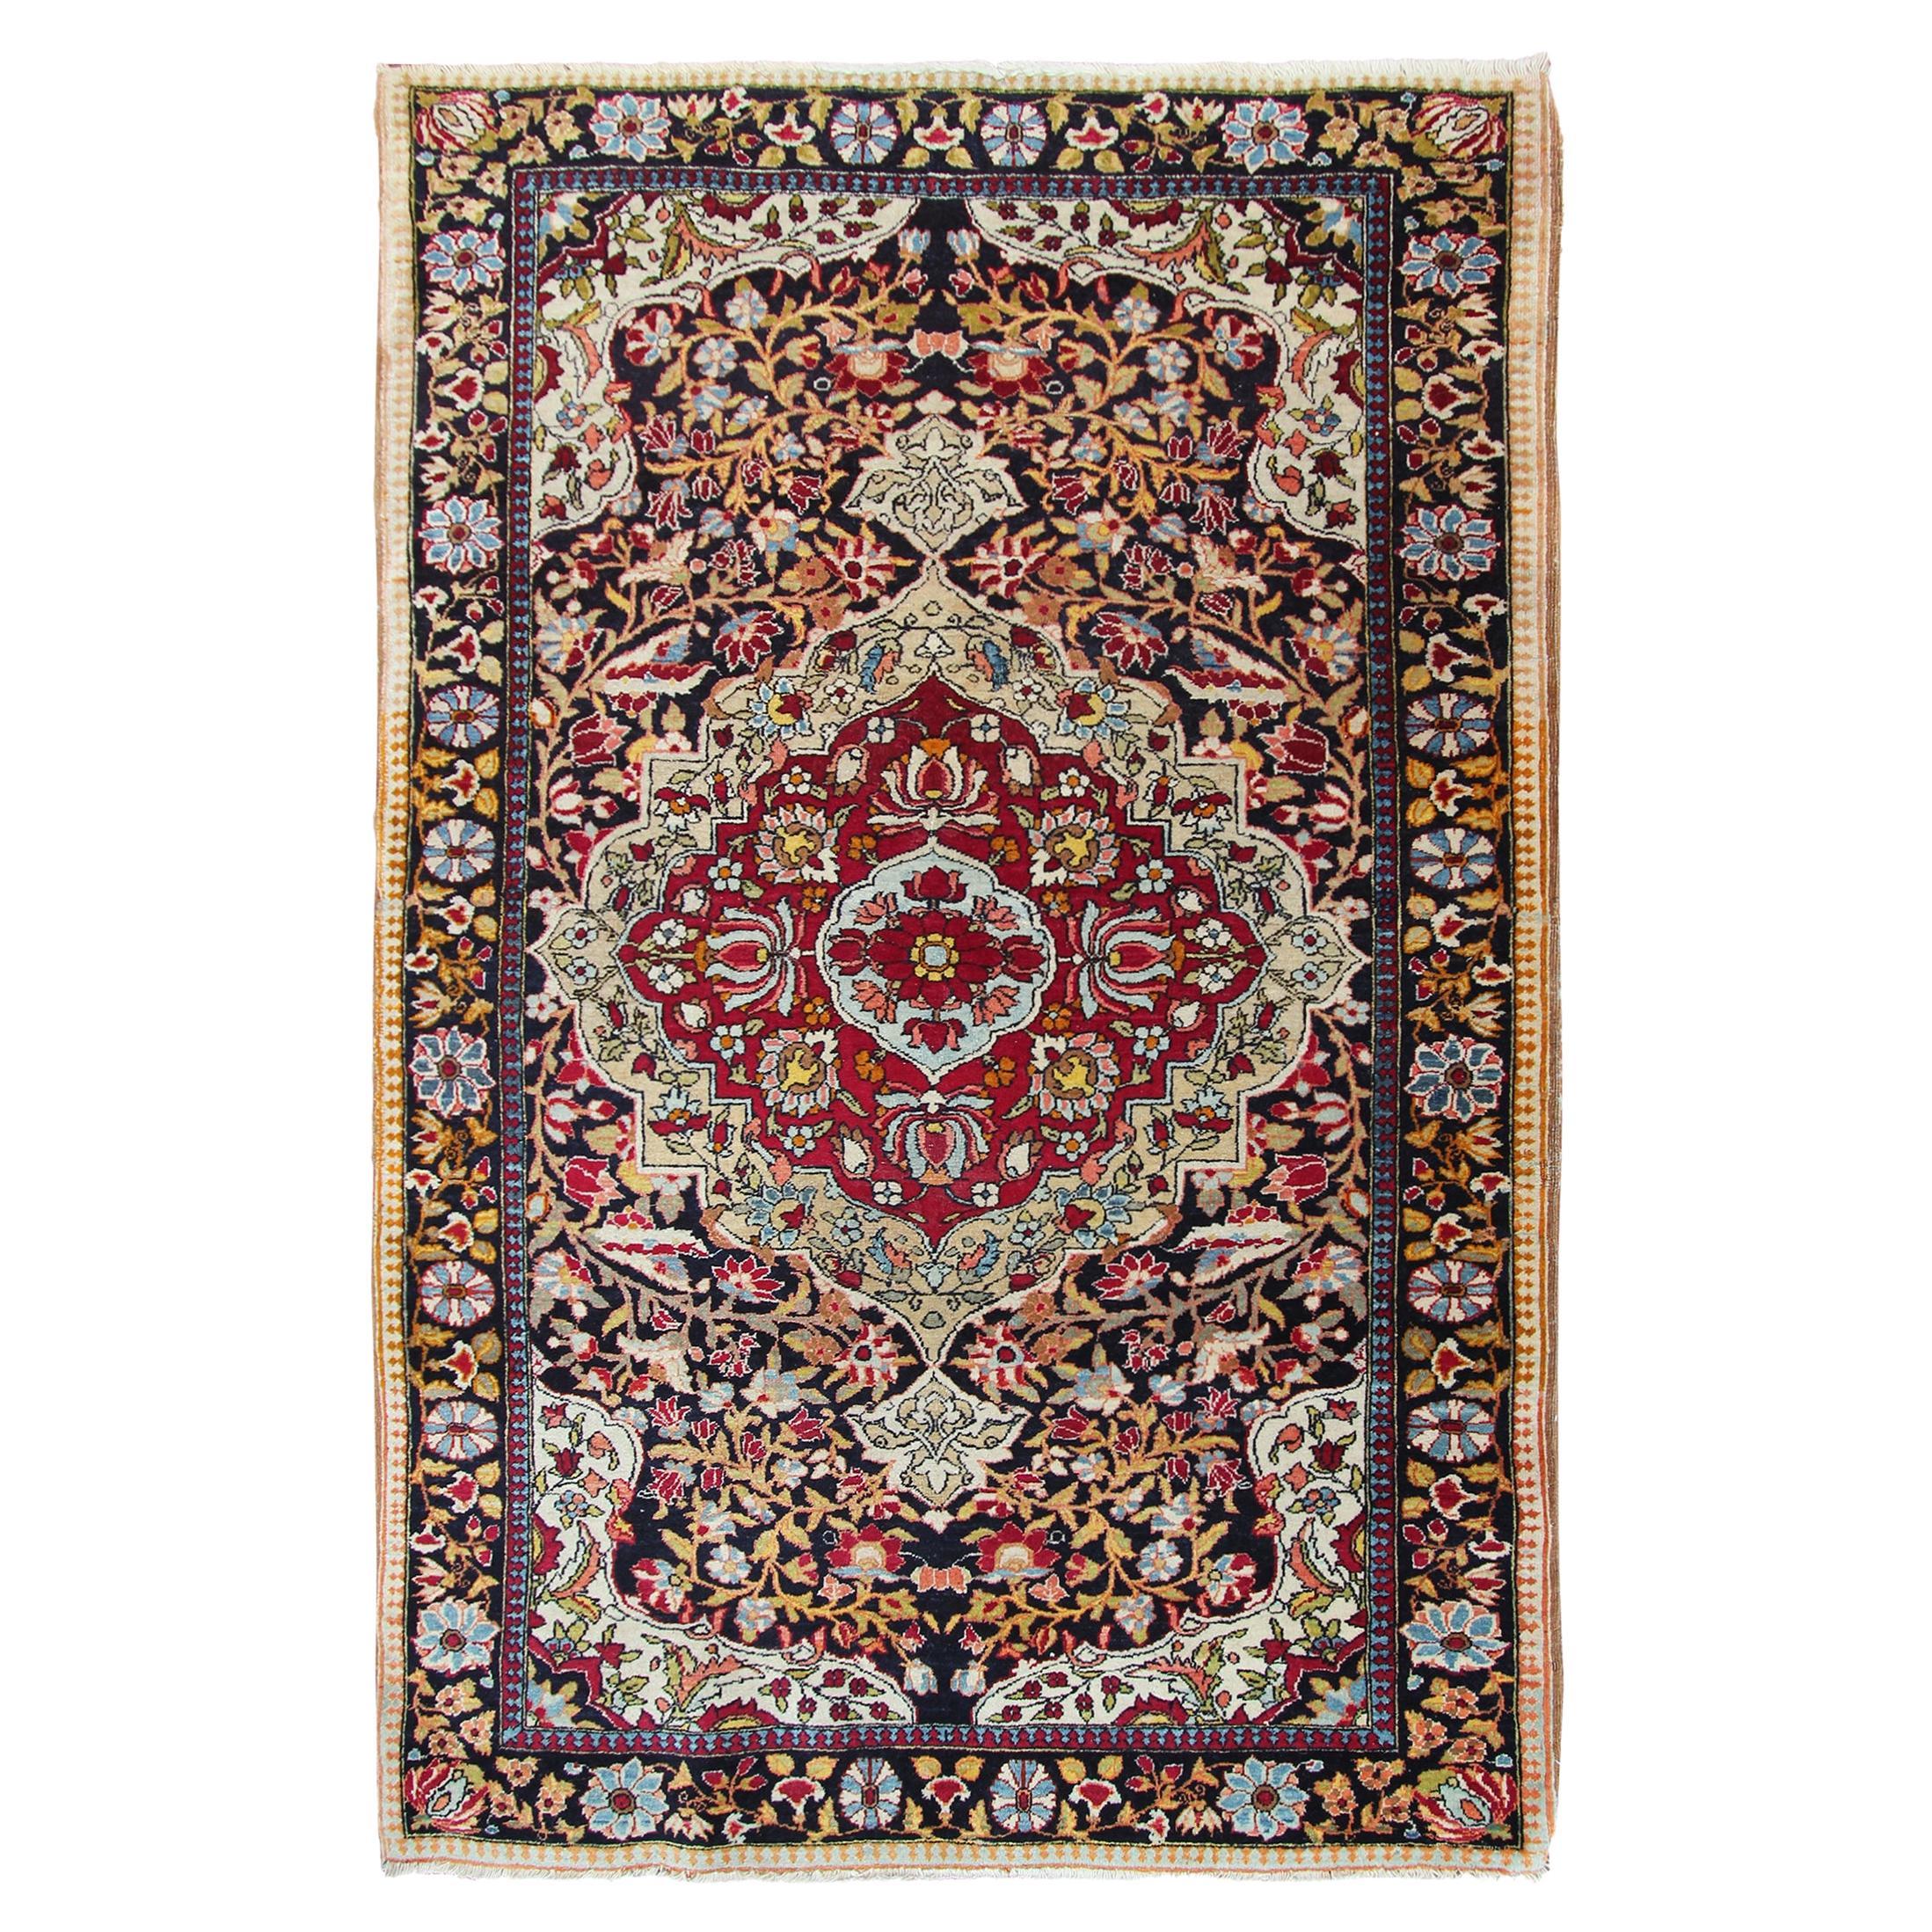 Black High Quality Antique Persian Isfahan Rug Artisan Work 4x5 107x153cm For Sale